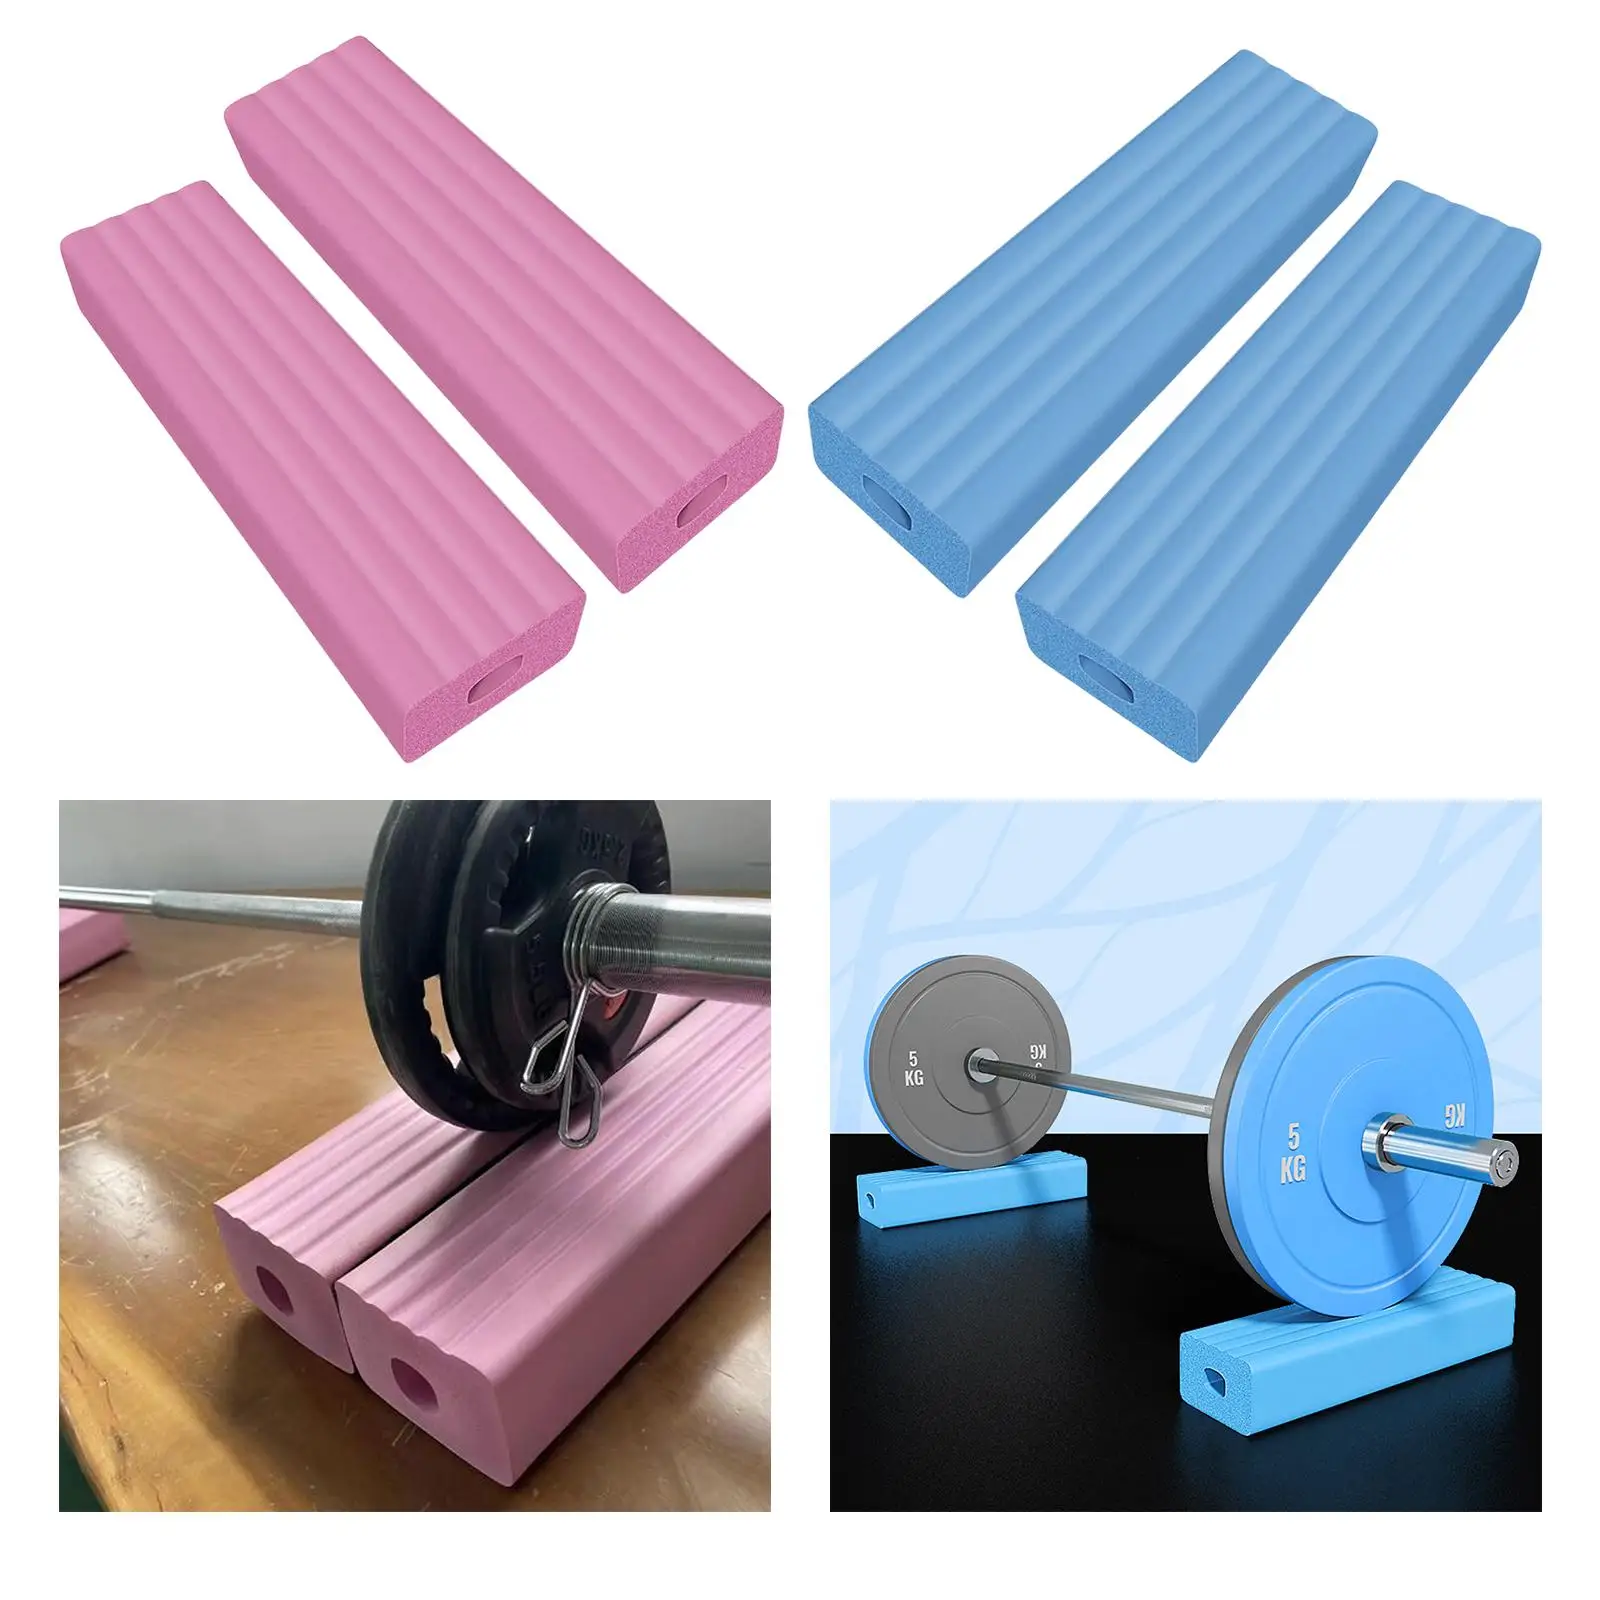 Foam Rubber Weightlifting Barbell Shock Absorber Cushion Premium Material